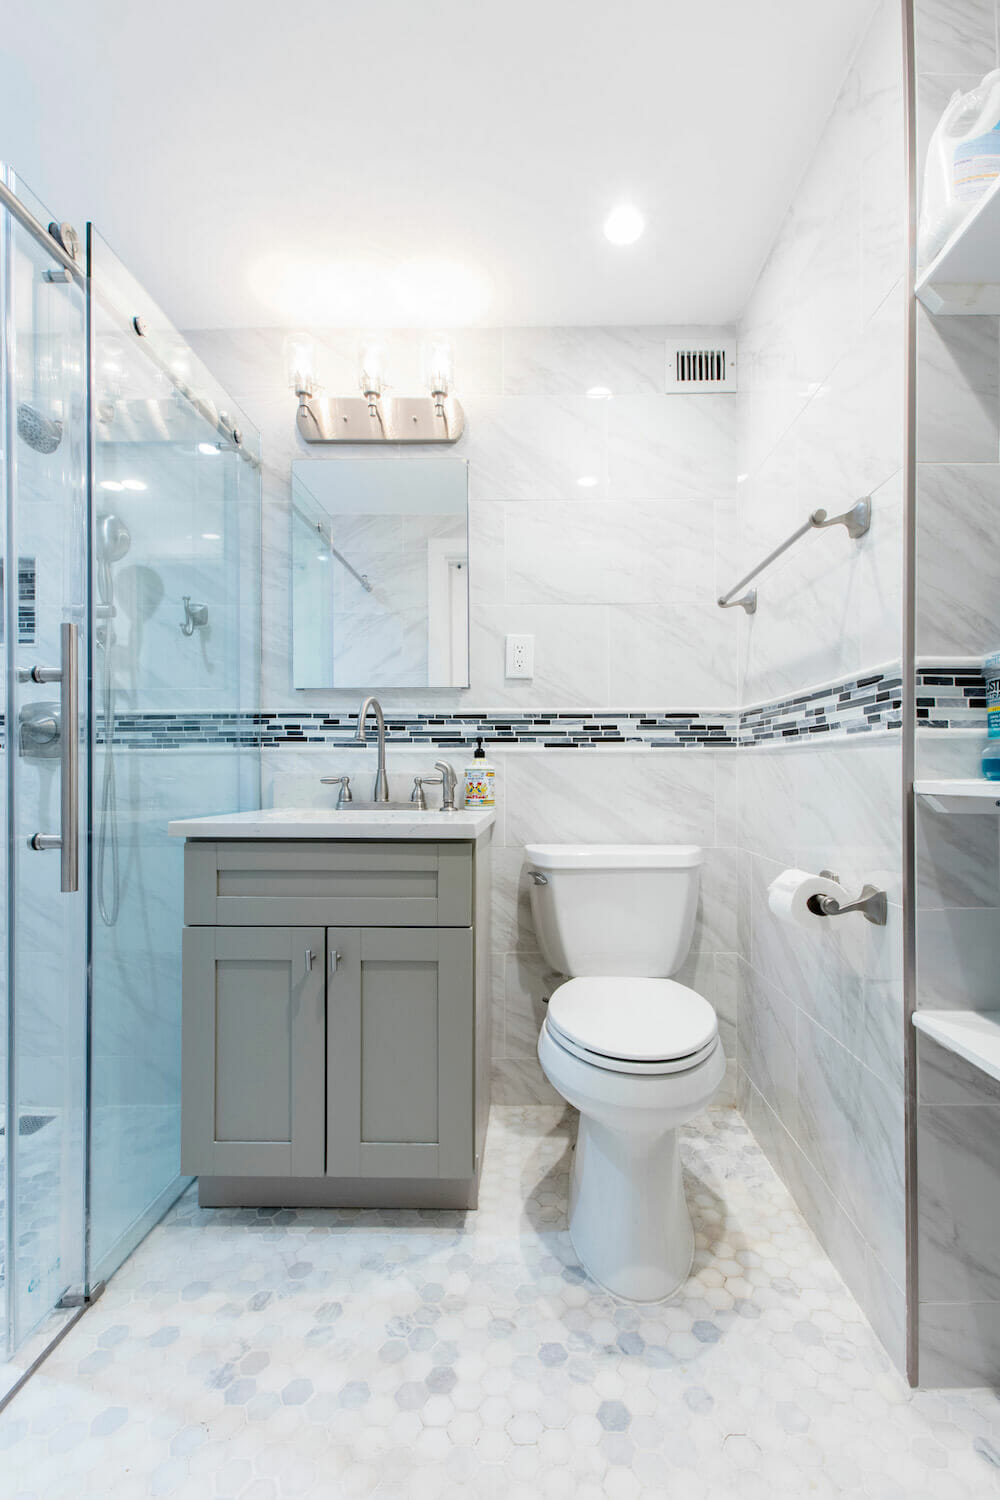 Image of a newly-renovated bathroom with toilet and gray vanity